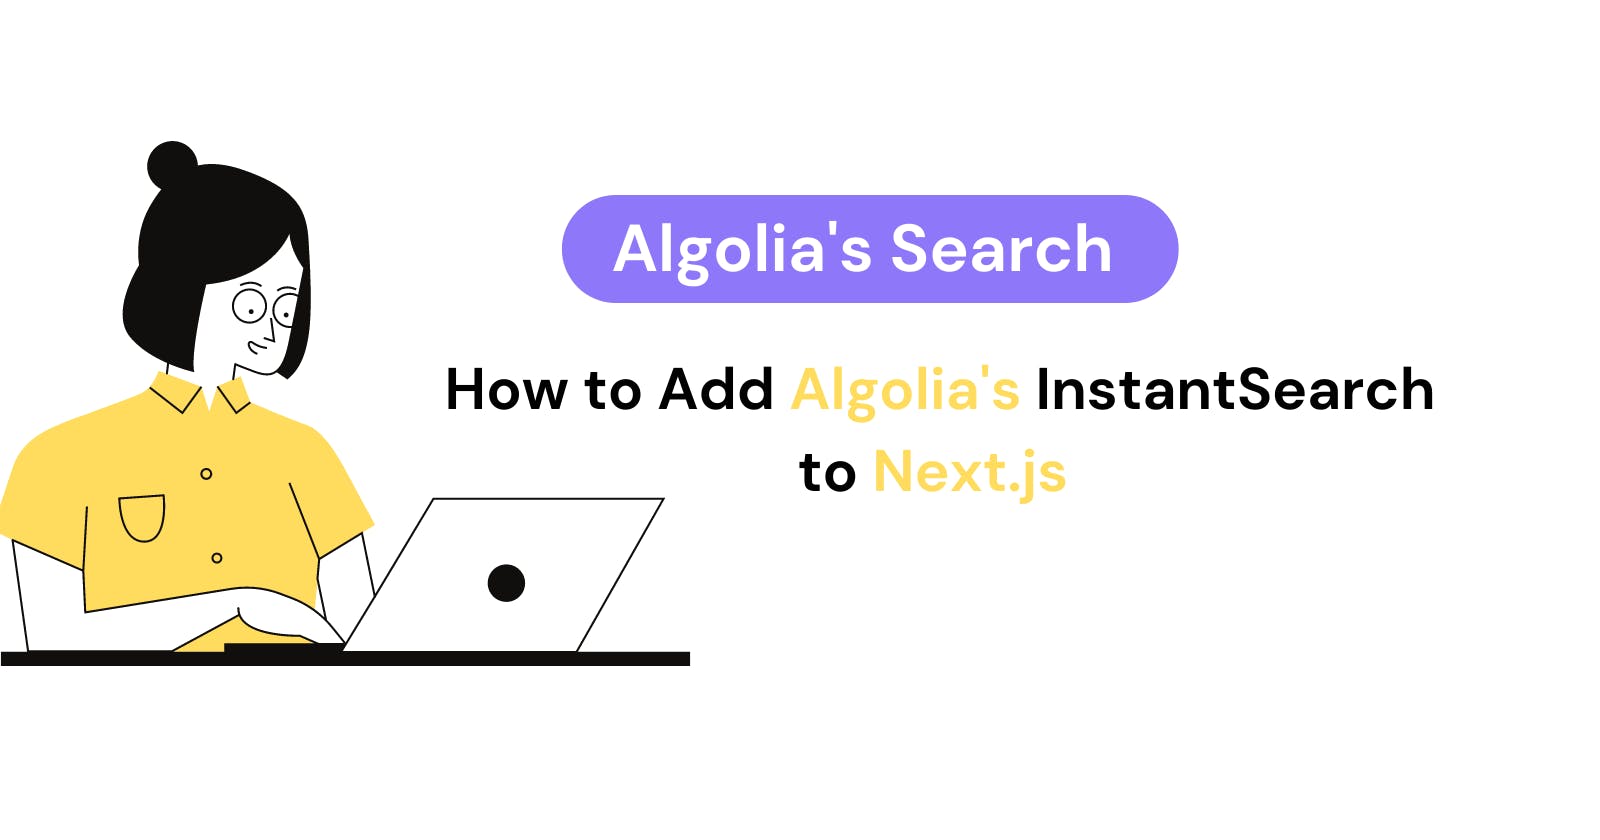 How to Add Algolia's InstantSearch to Next.js